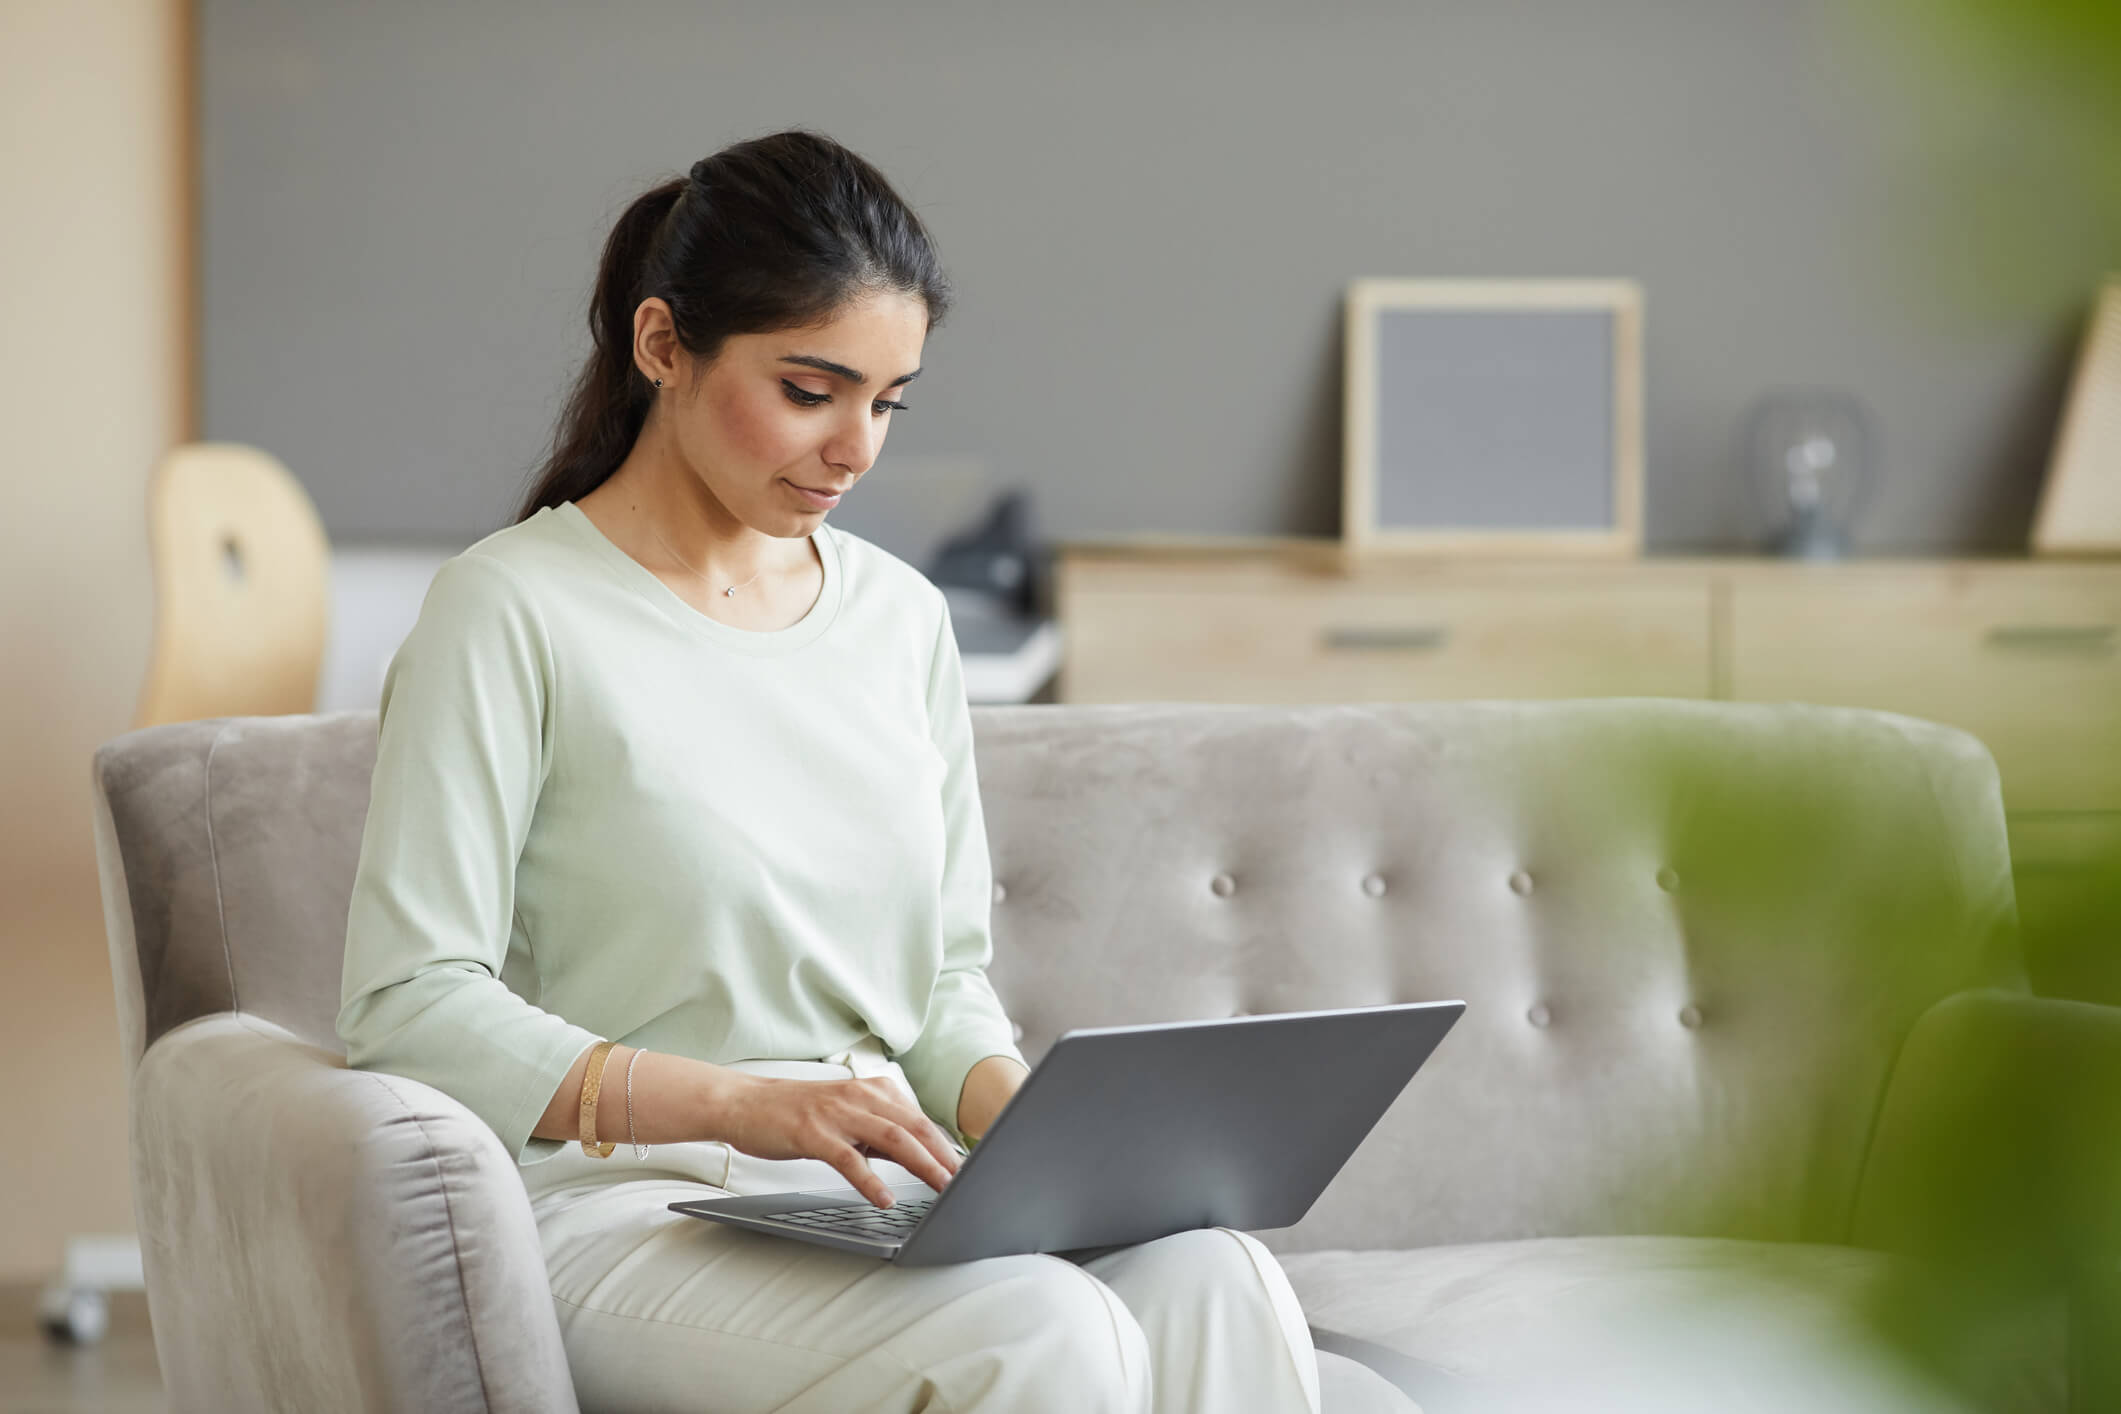 A woman with long hair and wearing a white long-sleeve blouse sits on the couch while searching for a mental health counselor on her computer.